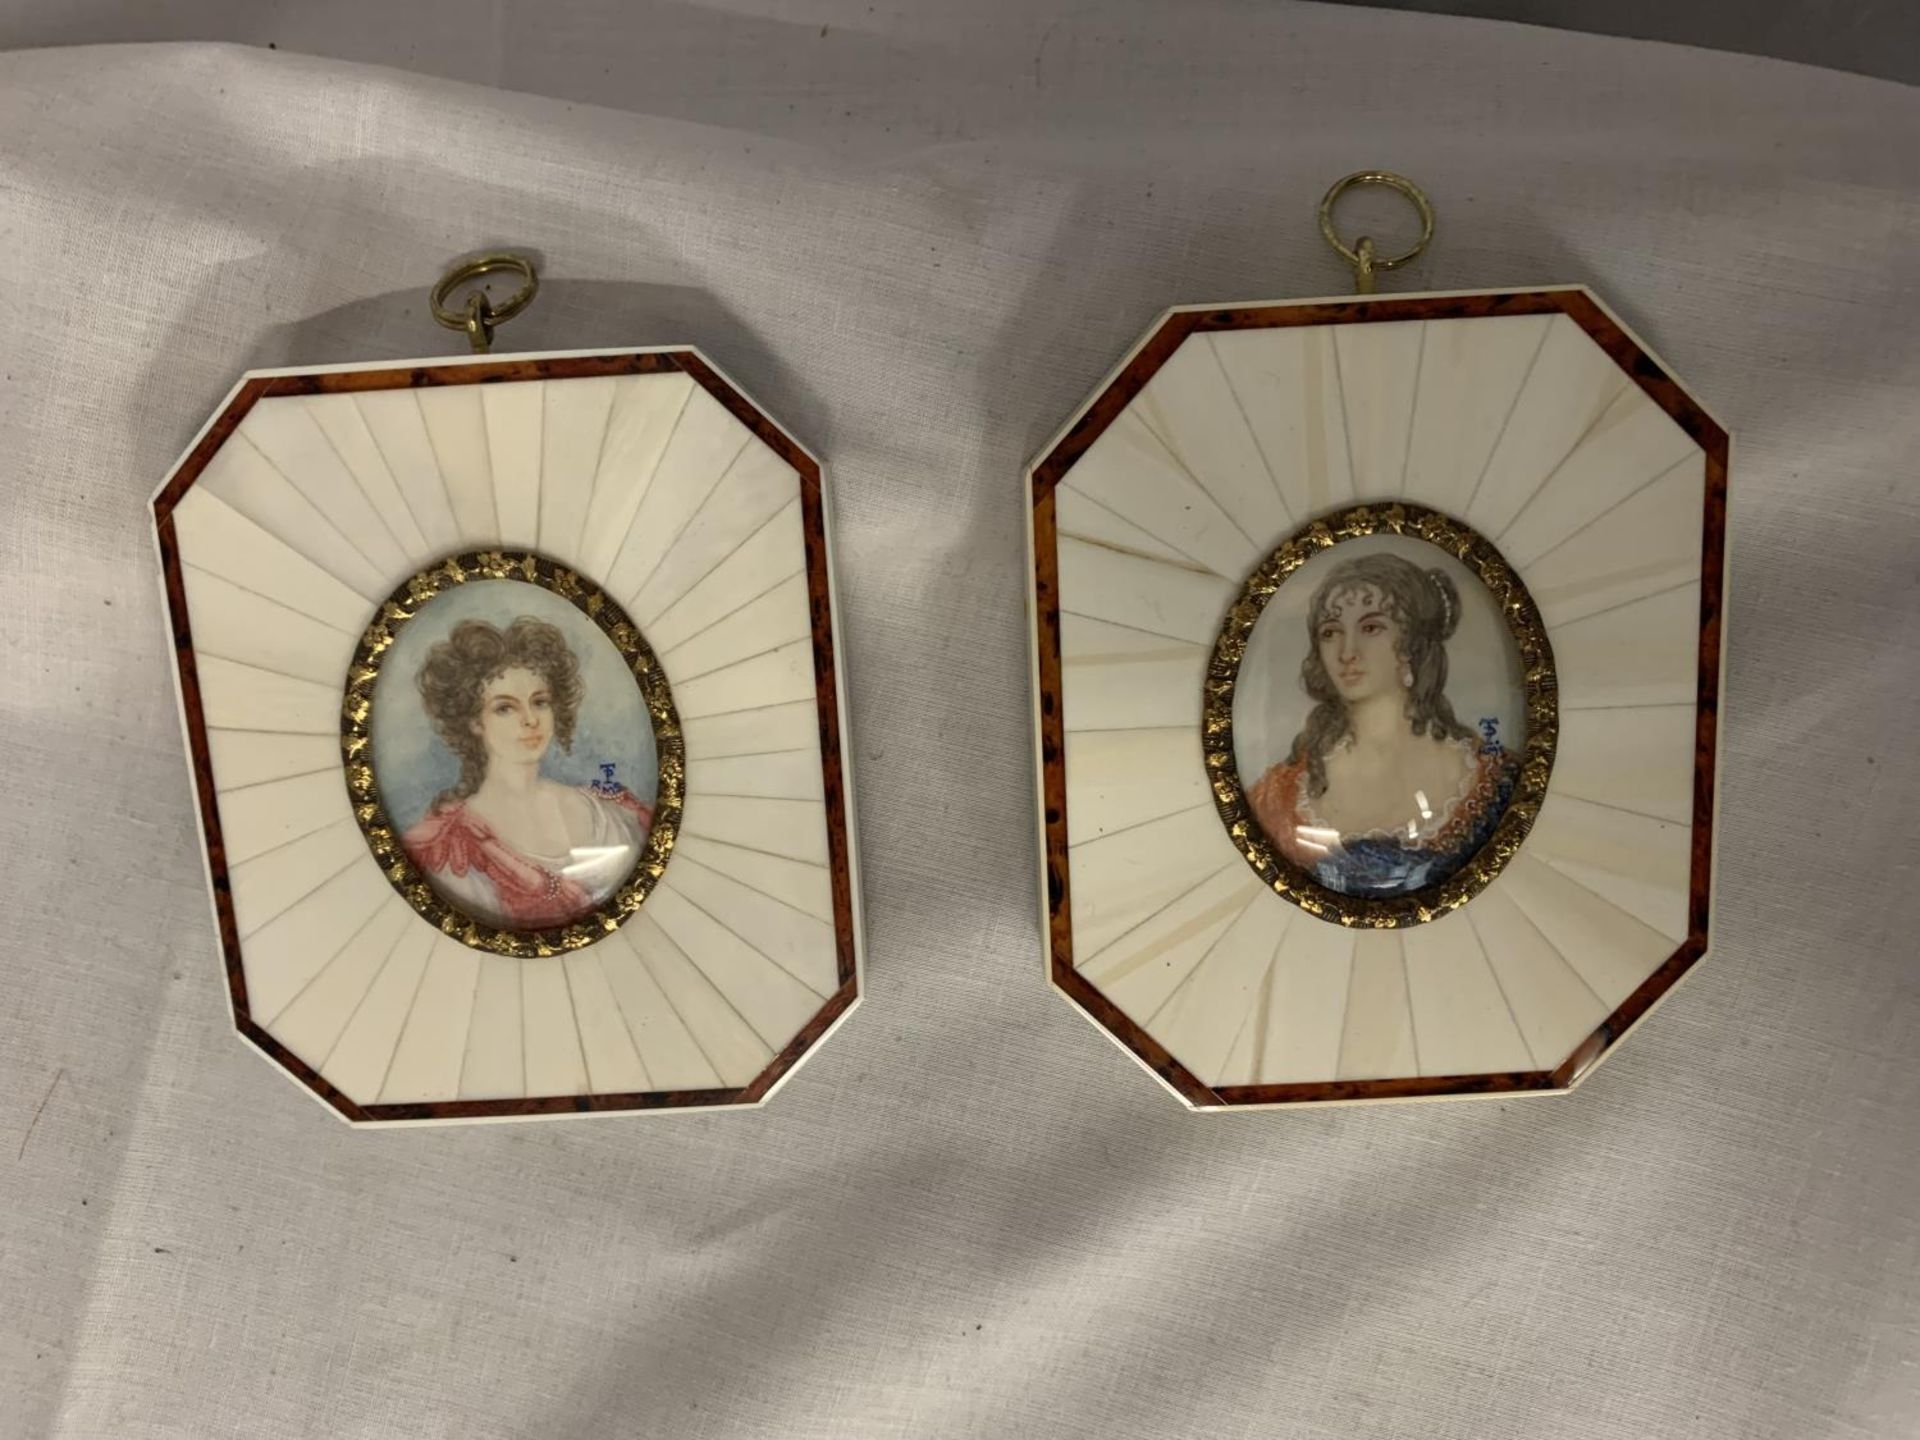 A PAIR OF ART DECO STYLE BONE FRAMED MINIATURE PRINTS OF REGAL LADIES. HIGHLY DECORATIVE FRAMES WITH